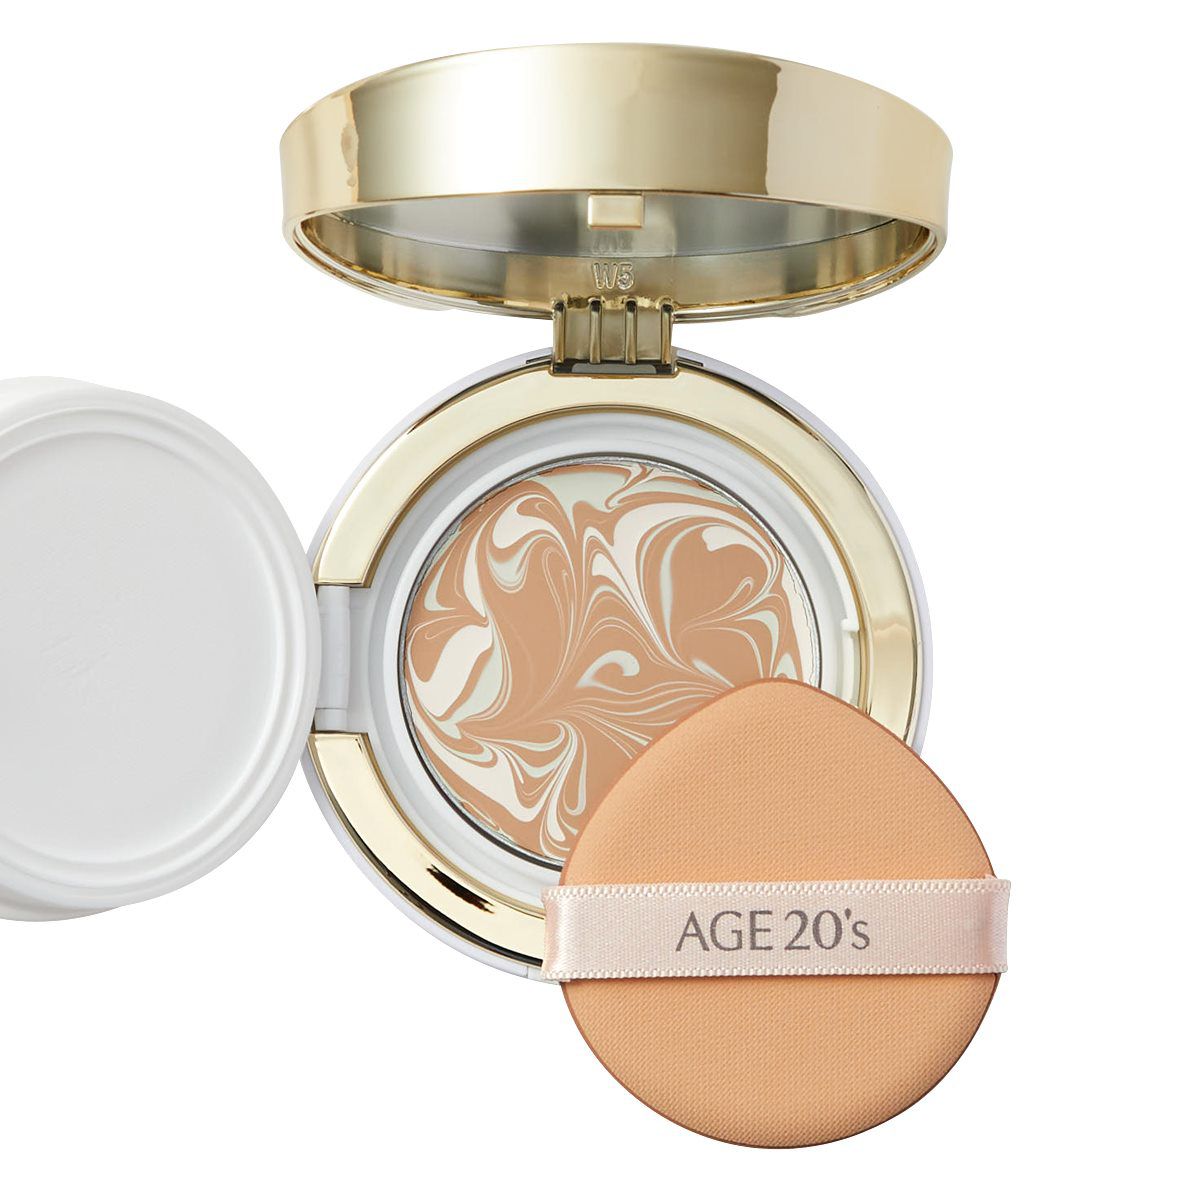 AGE 20's Signature Essence Cover Pact Long Stay SPF50+/PA++++ (no.21) 14g*2のバリエーション2